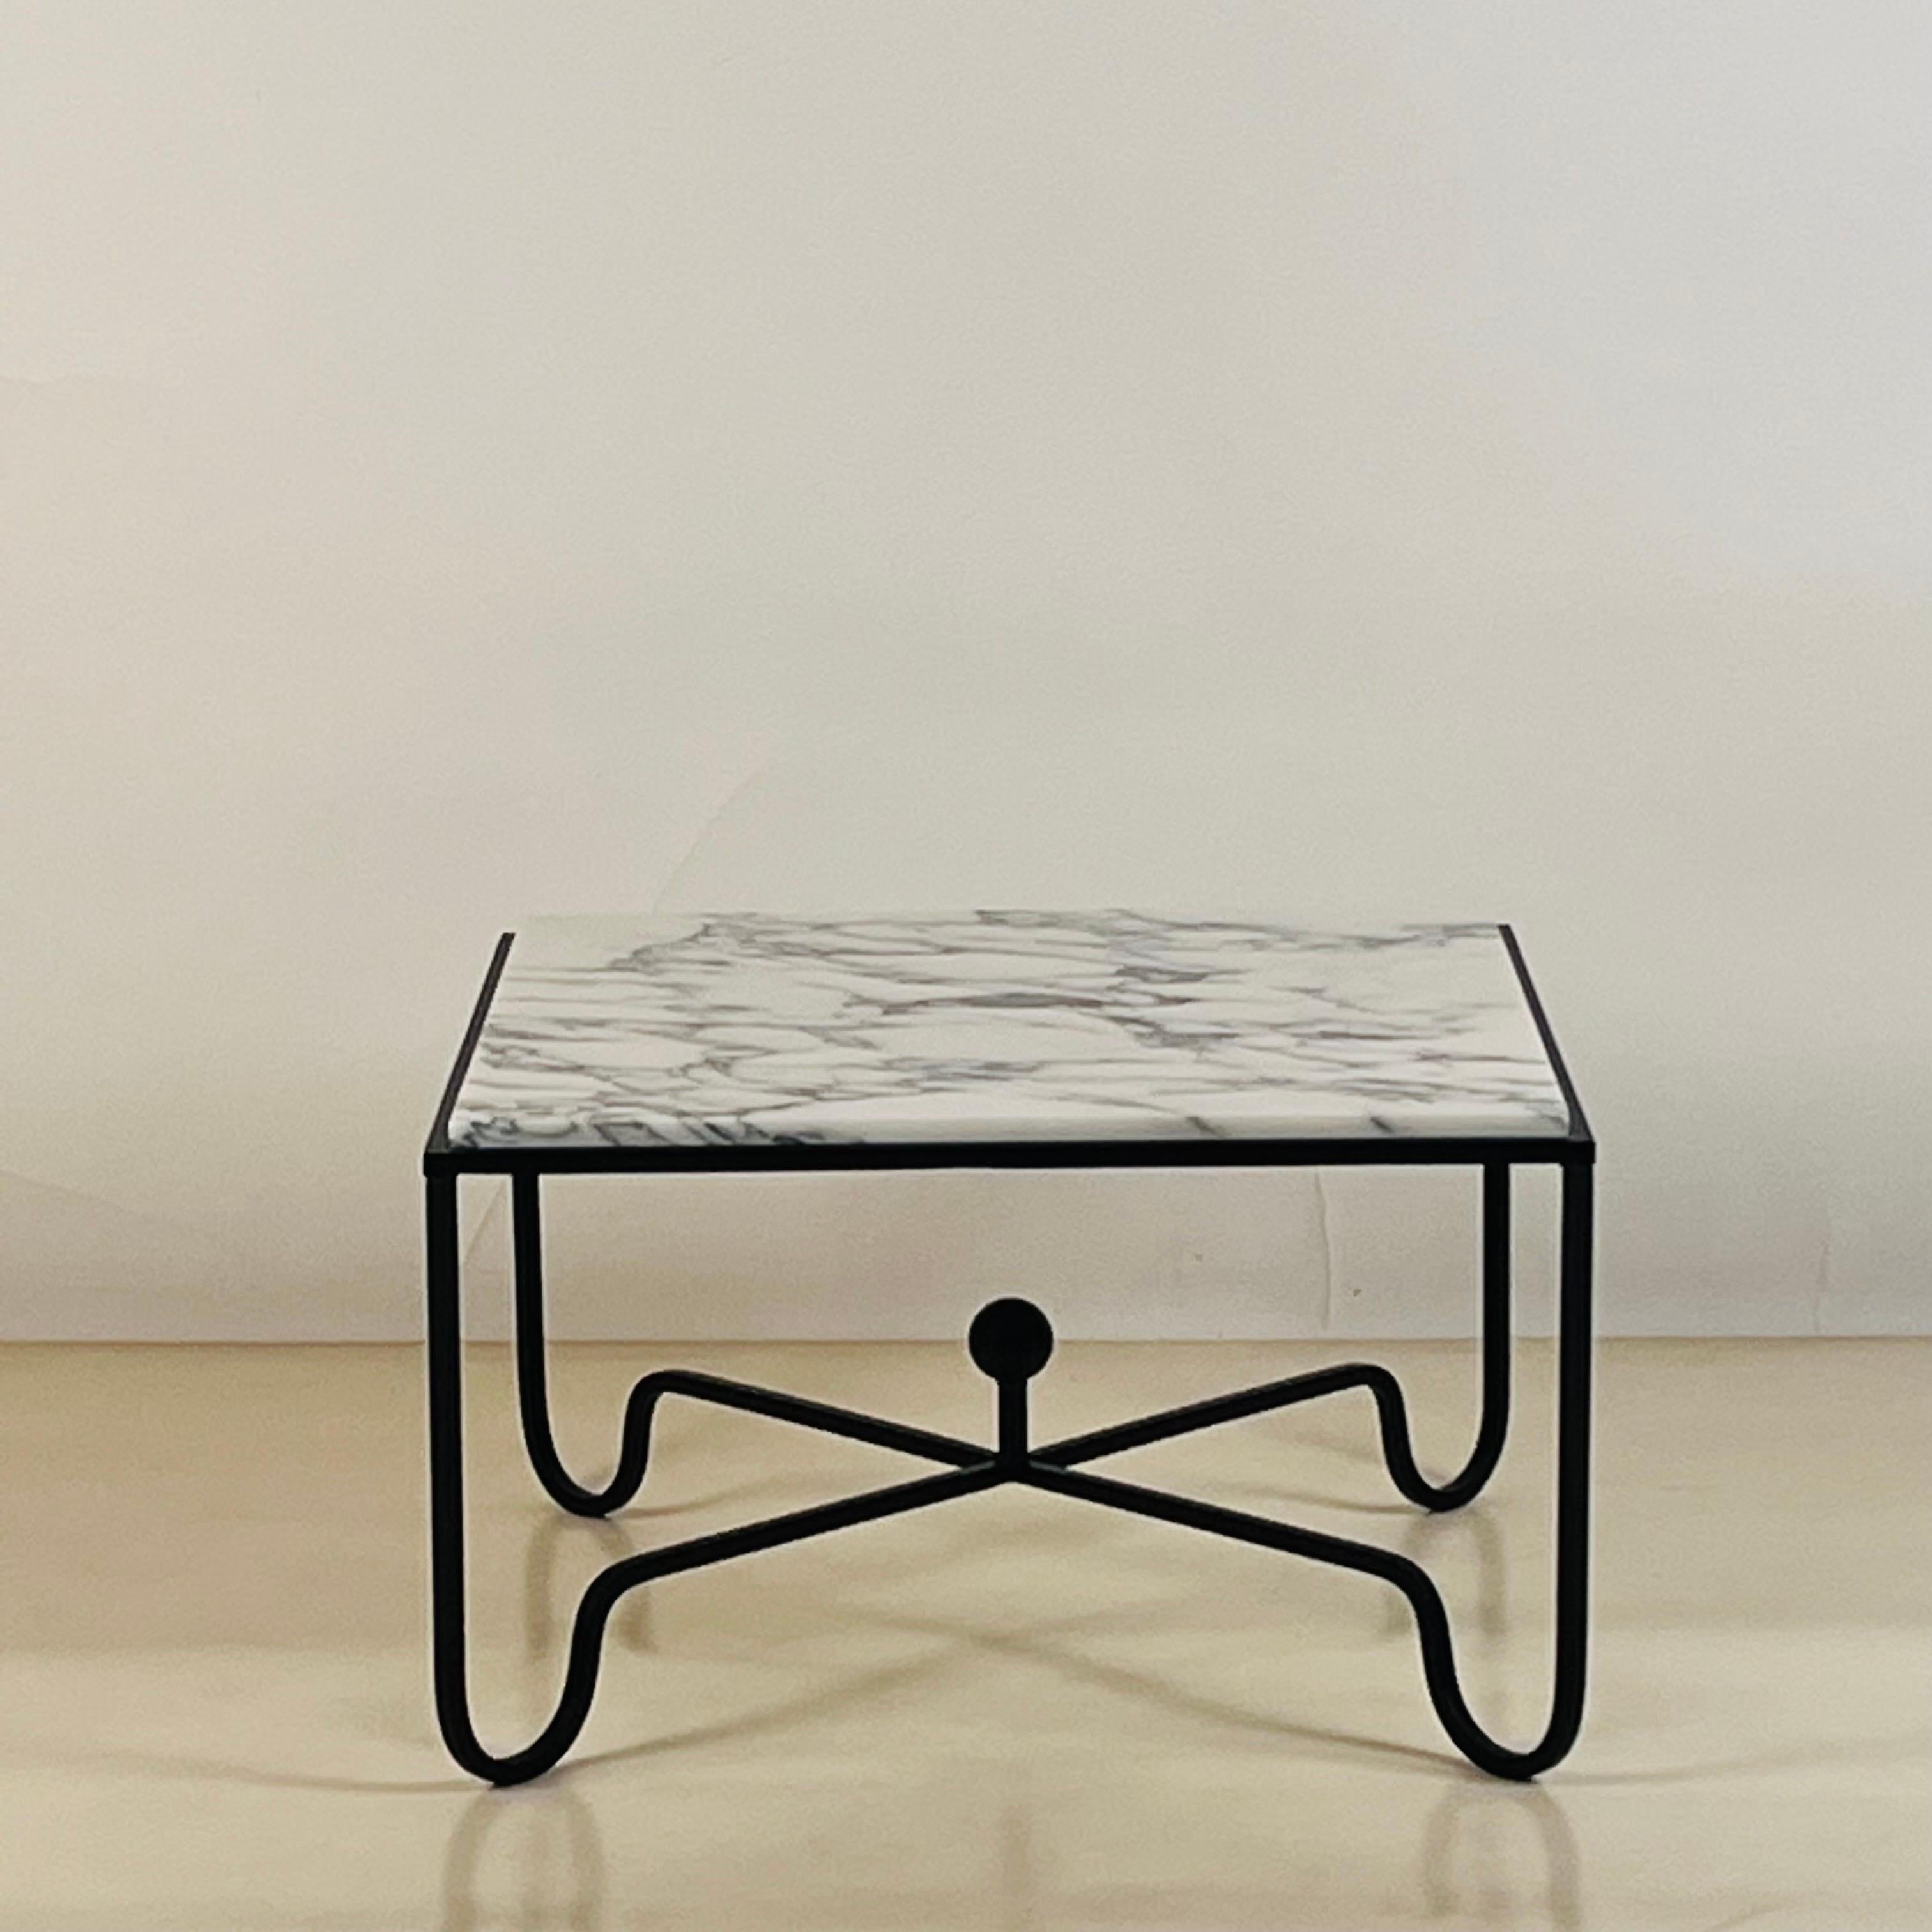 Arabescato marble 'Entretoise' side table by Design Frères. Chic and understated.
 